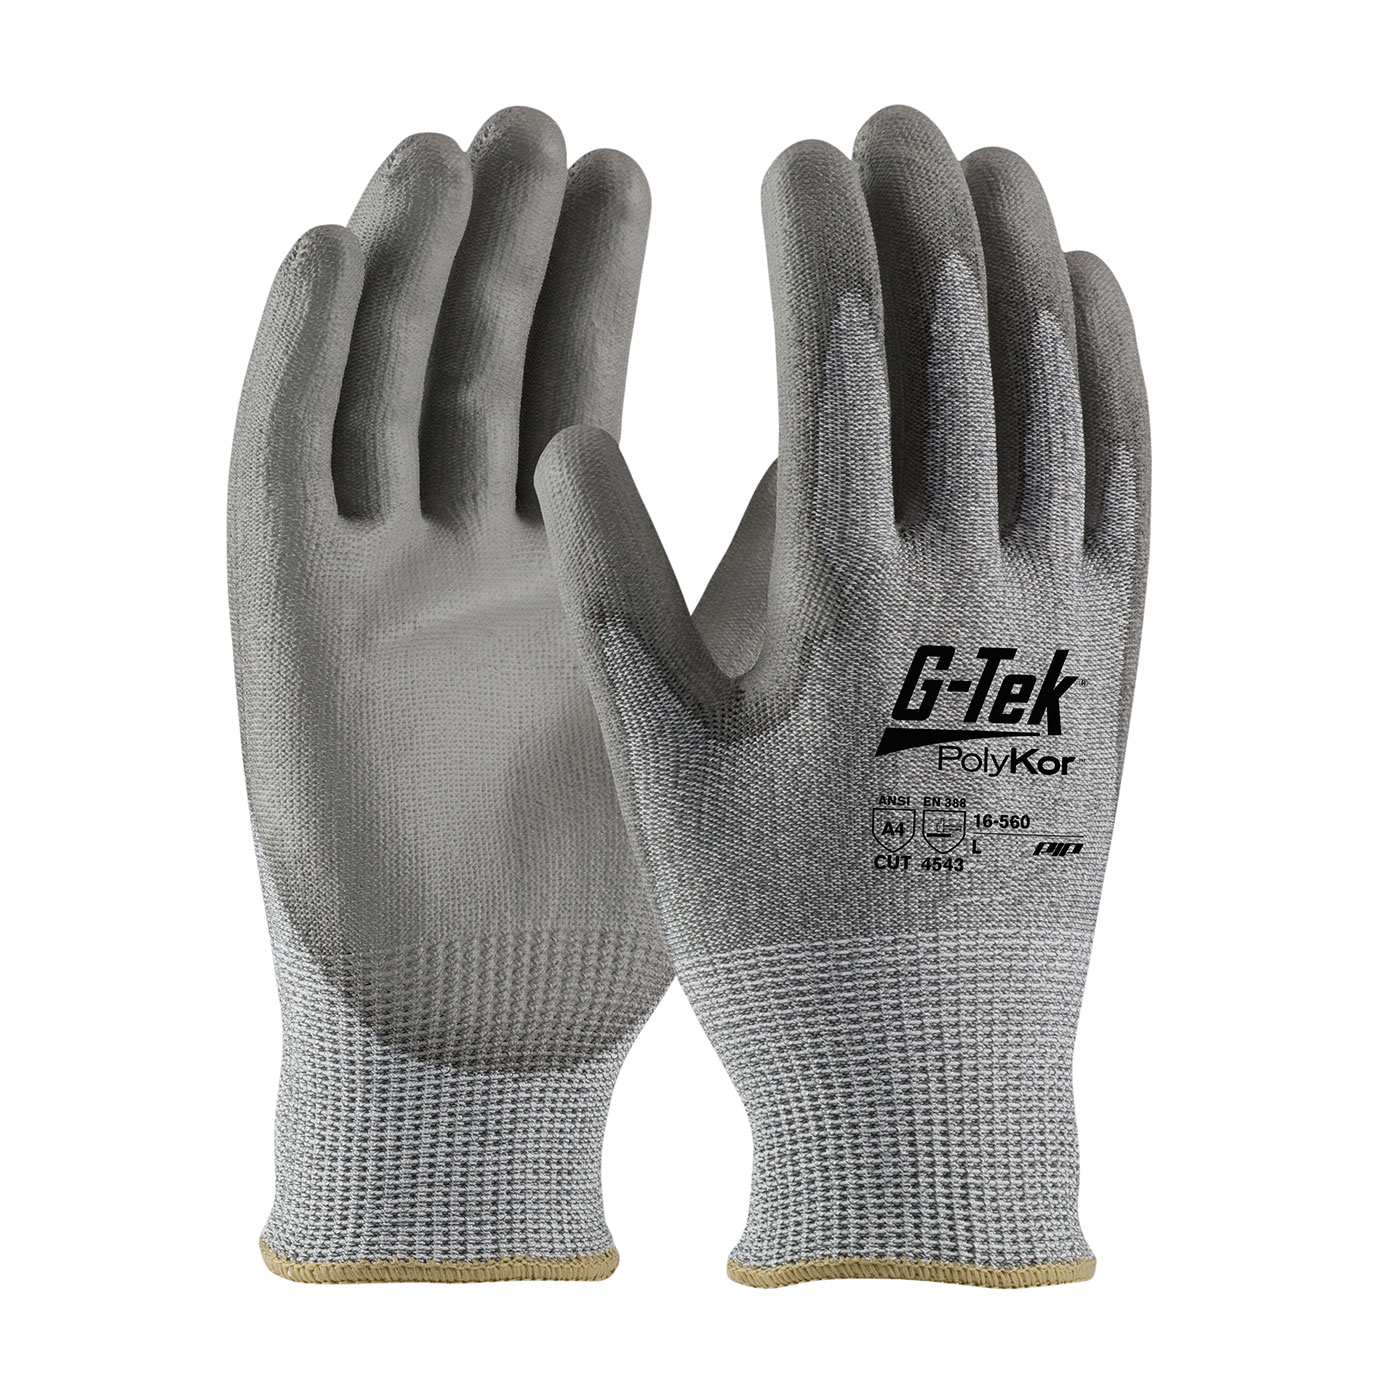 PIP 16-560/M G-Tek PolyKor Seamless Knit PolyKor Blended Glove with Polyurethane Coated Smooth Grip on Palm & Fingers - Medium PID-16 560 M